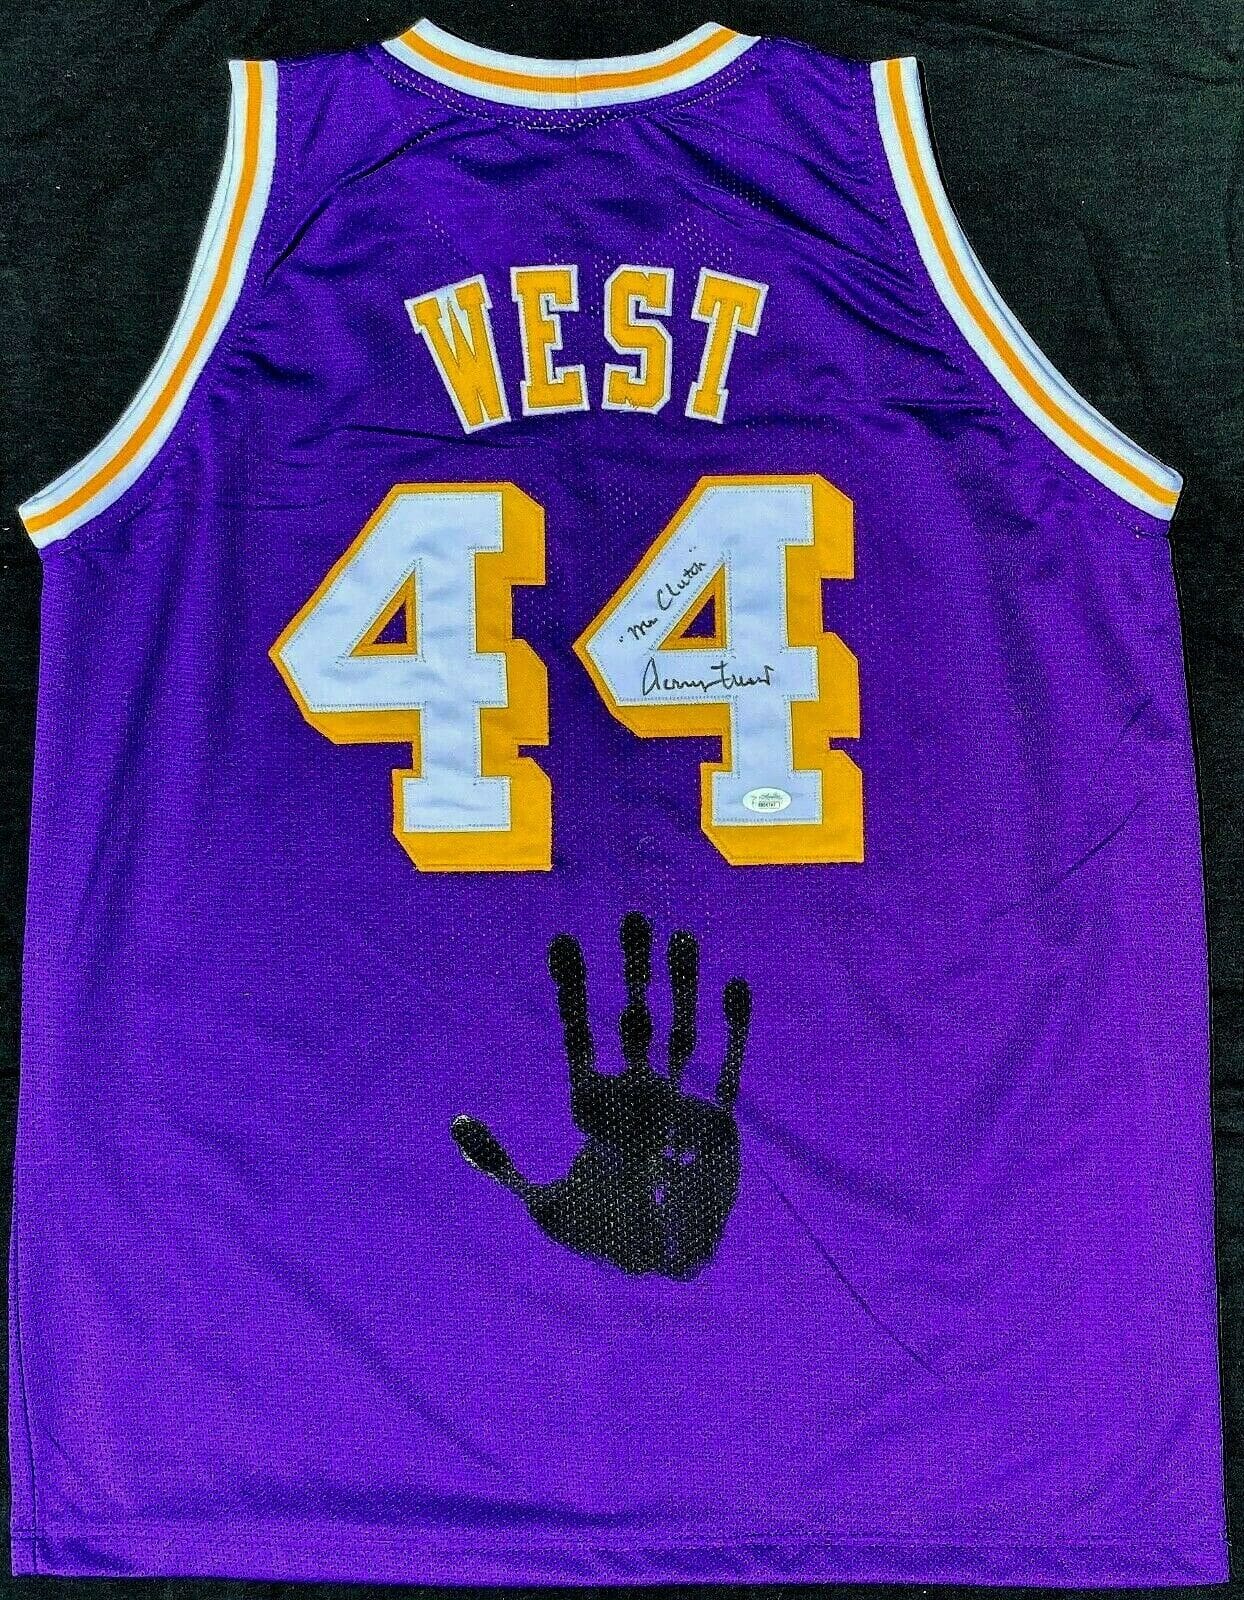 Jerry West Hand Print Signed Autographed Yellow Jersey JSA BB00708 Mr.  Clutch – Fiterman Sports Group